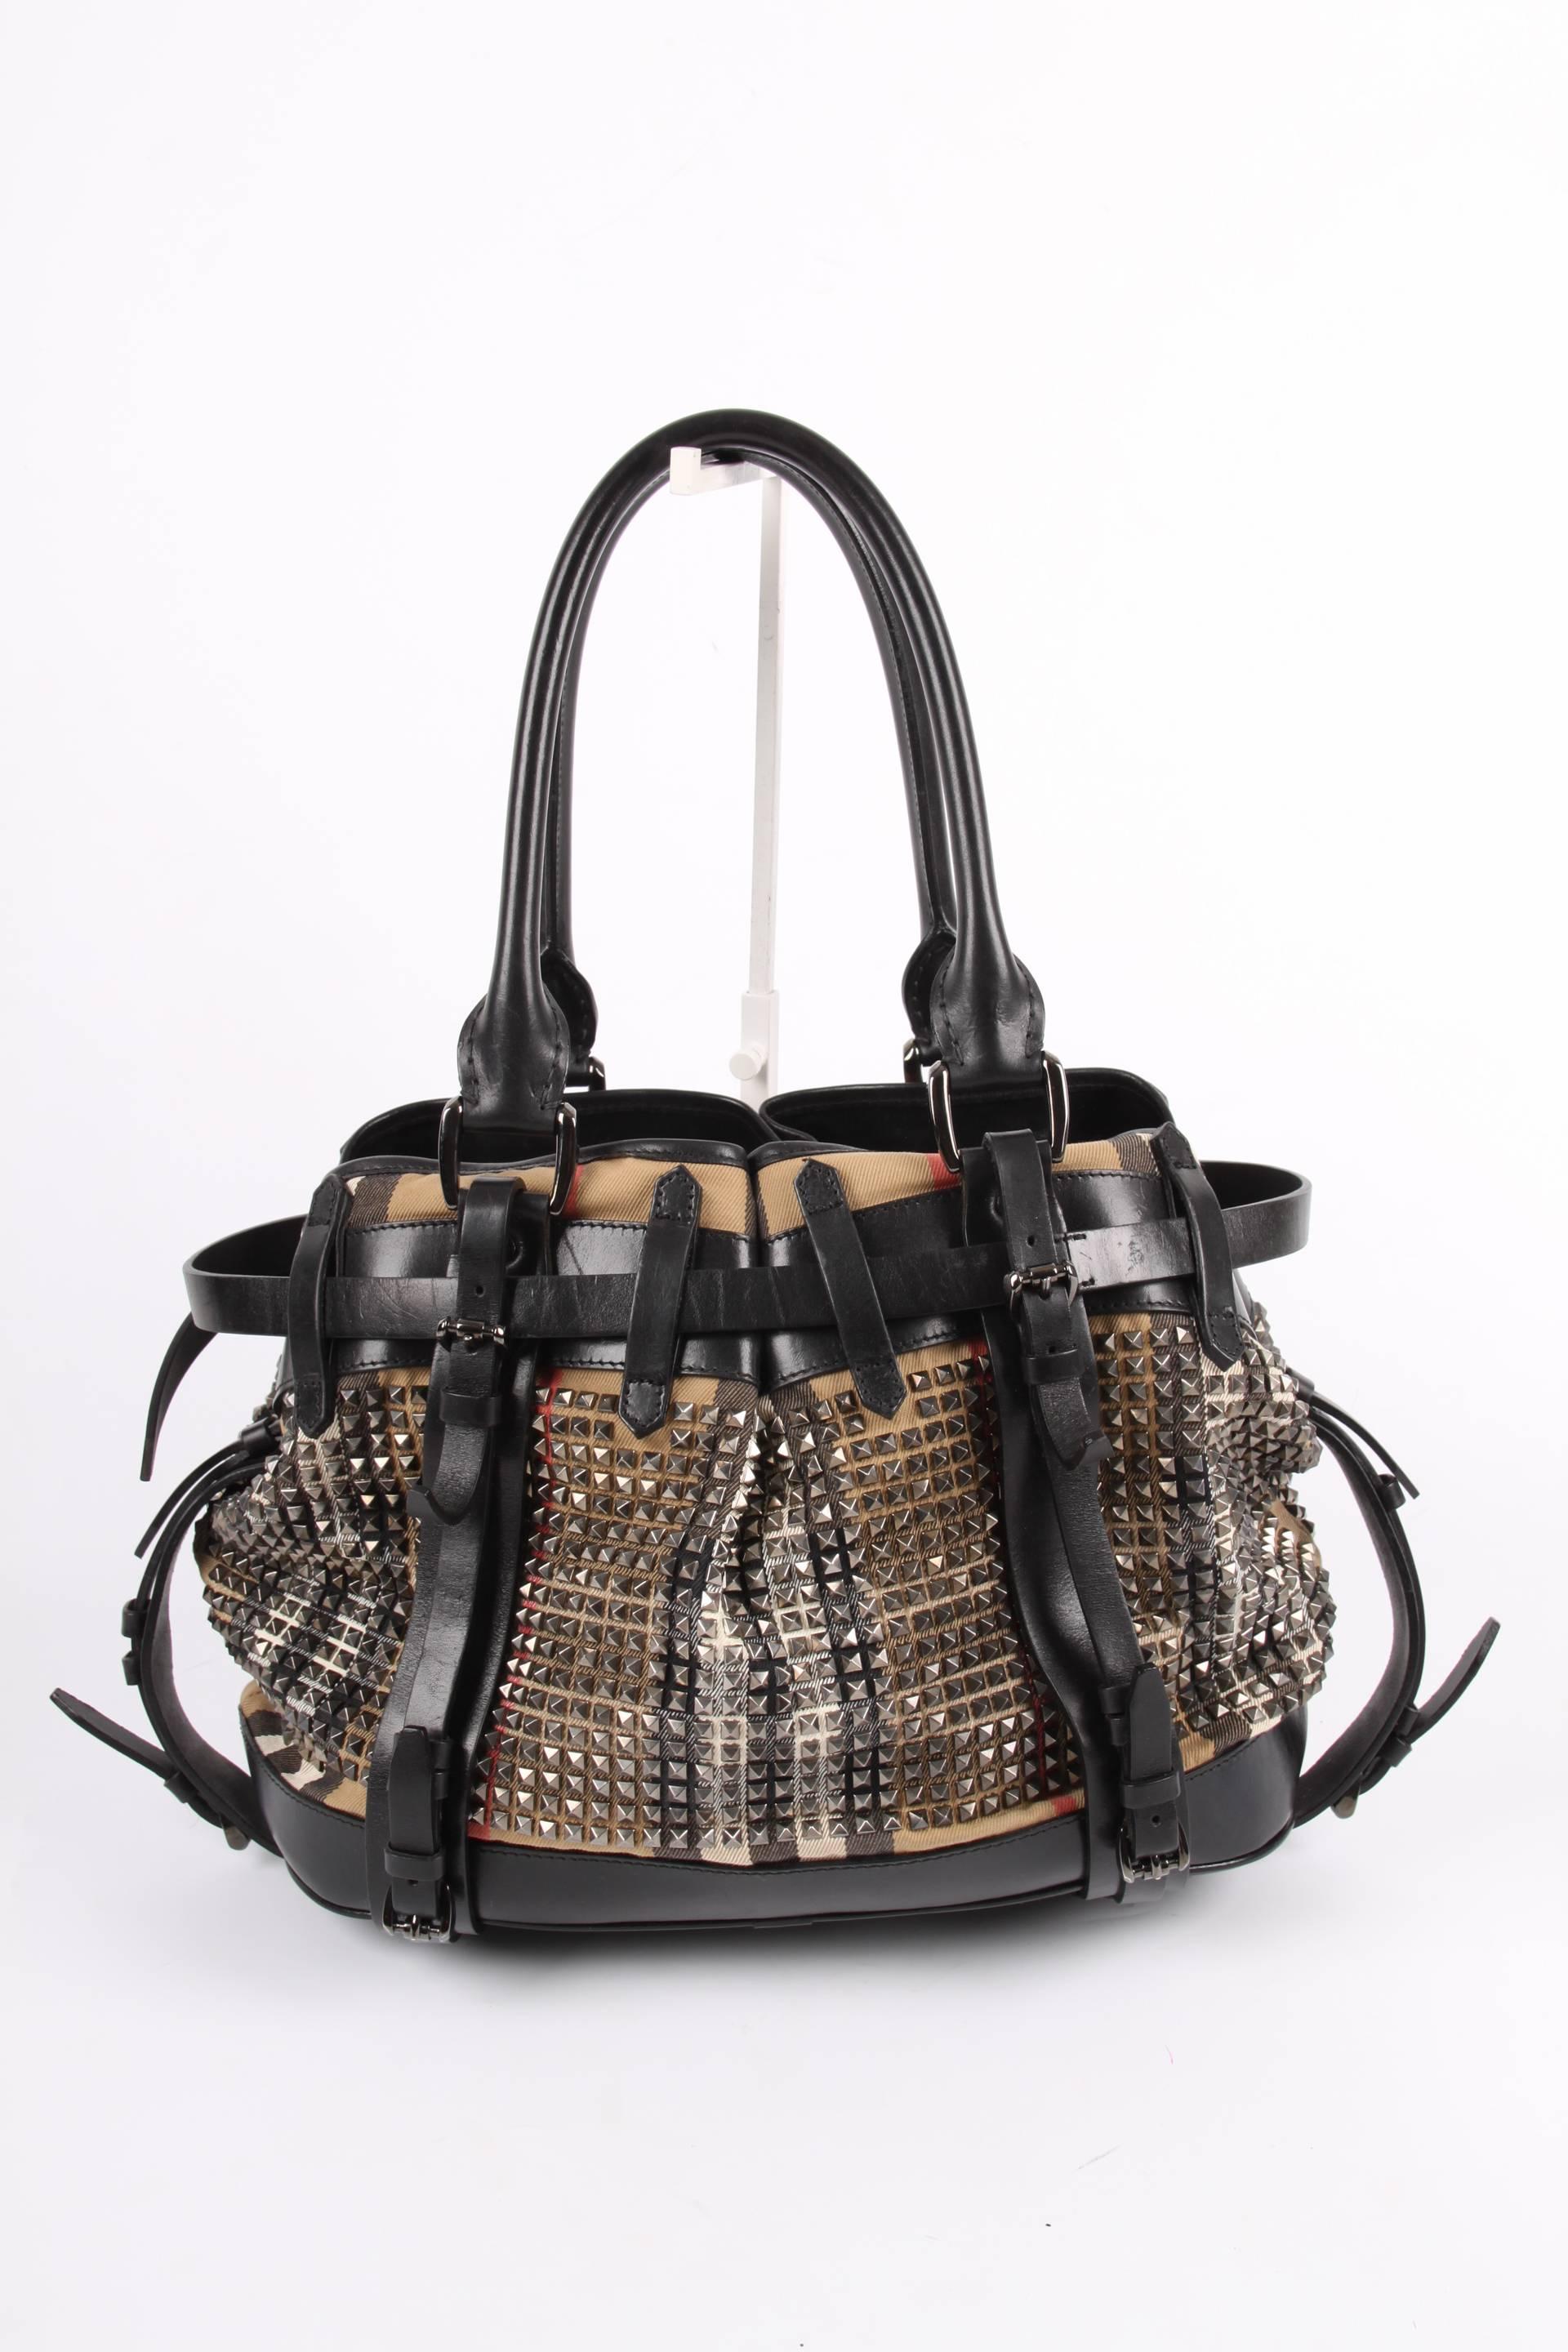 Rather large sized bag crafted in canvas with the welknown Burberry check in beige, black, white and red, covered with hundreds of silver-tone studs.

Combined with black leather, numerous decorative leather straps at the front plus a Burberry logo